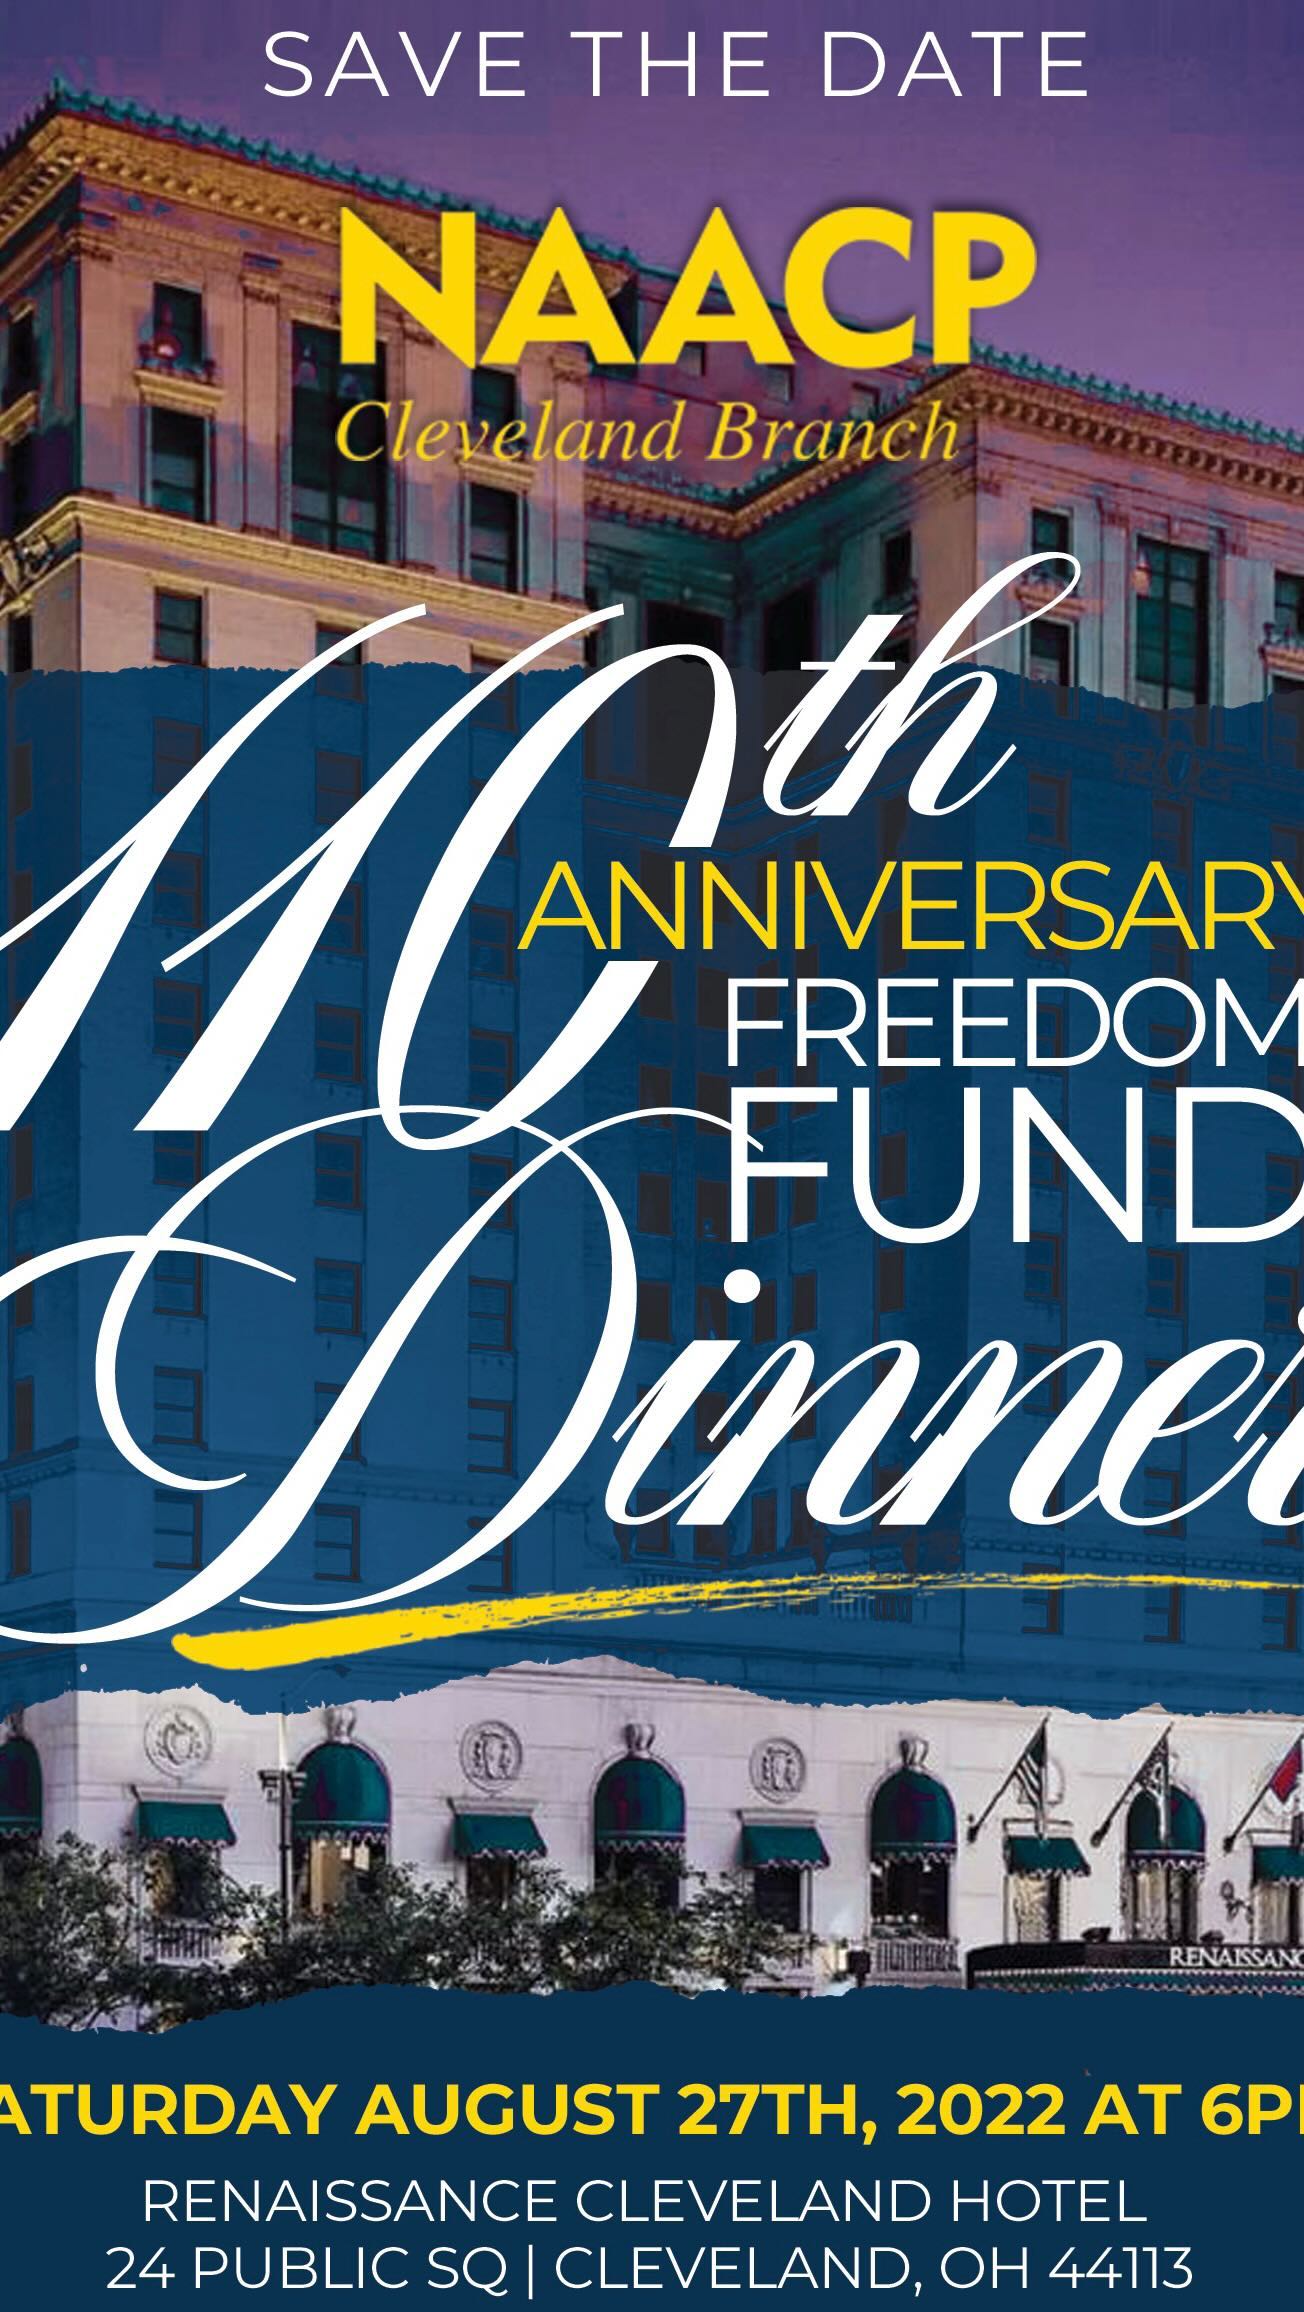 SAVE THE DATE! 

Didn’t make it to our 109th Anniversary Freedom Fund Dinner…We had a good time!

Don’t miss out this year! 

Join us as we celebrate our 110th anniversary of servicing our community! 

#SaveTheDate #ohioevents #naacpcleveland  #freedomfunddinner #naacp #throwbackthursday